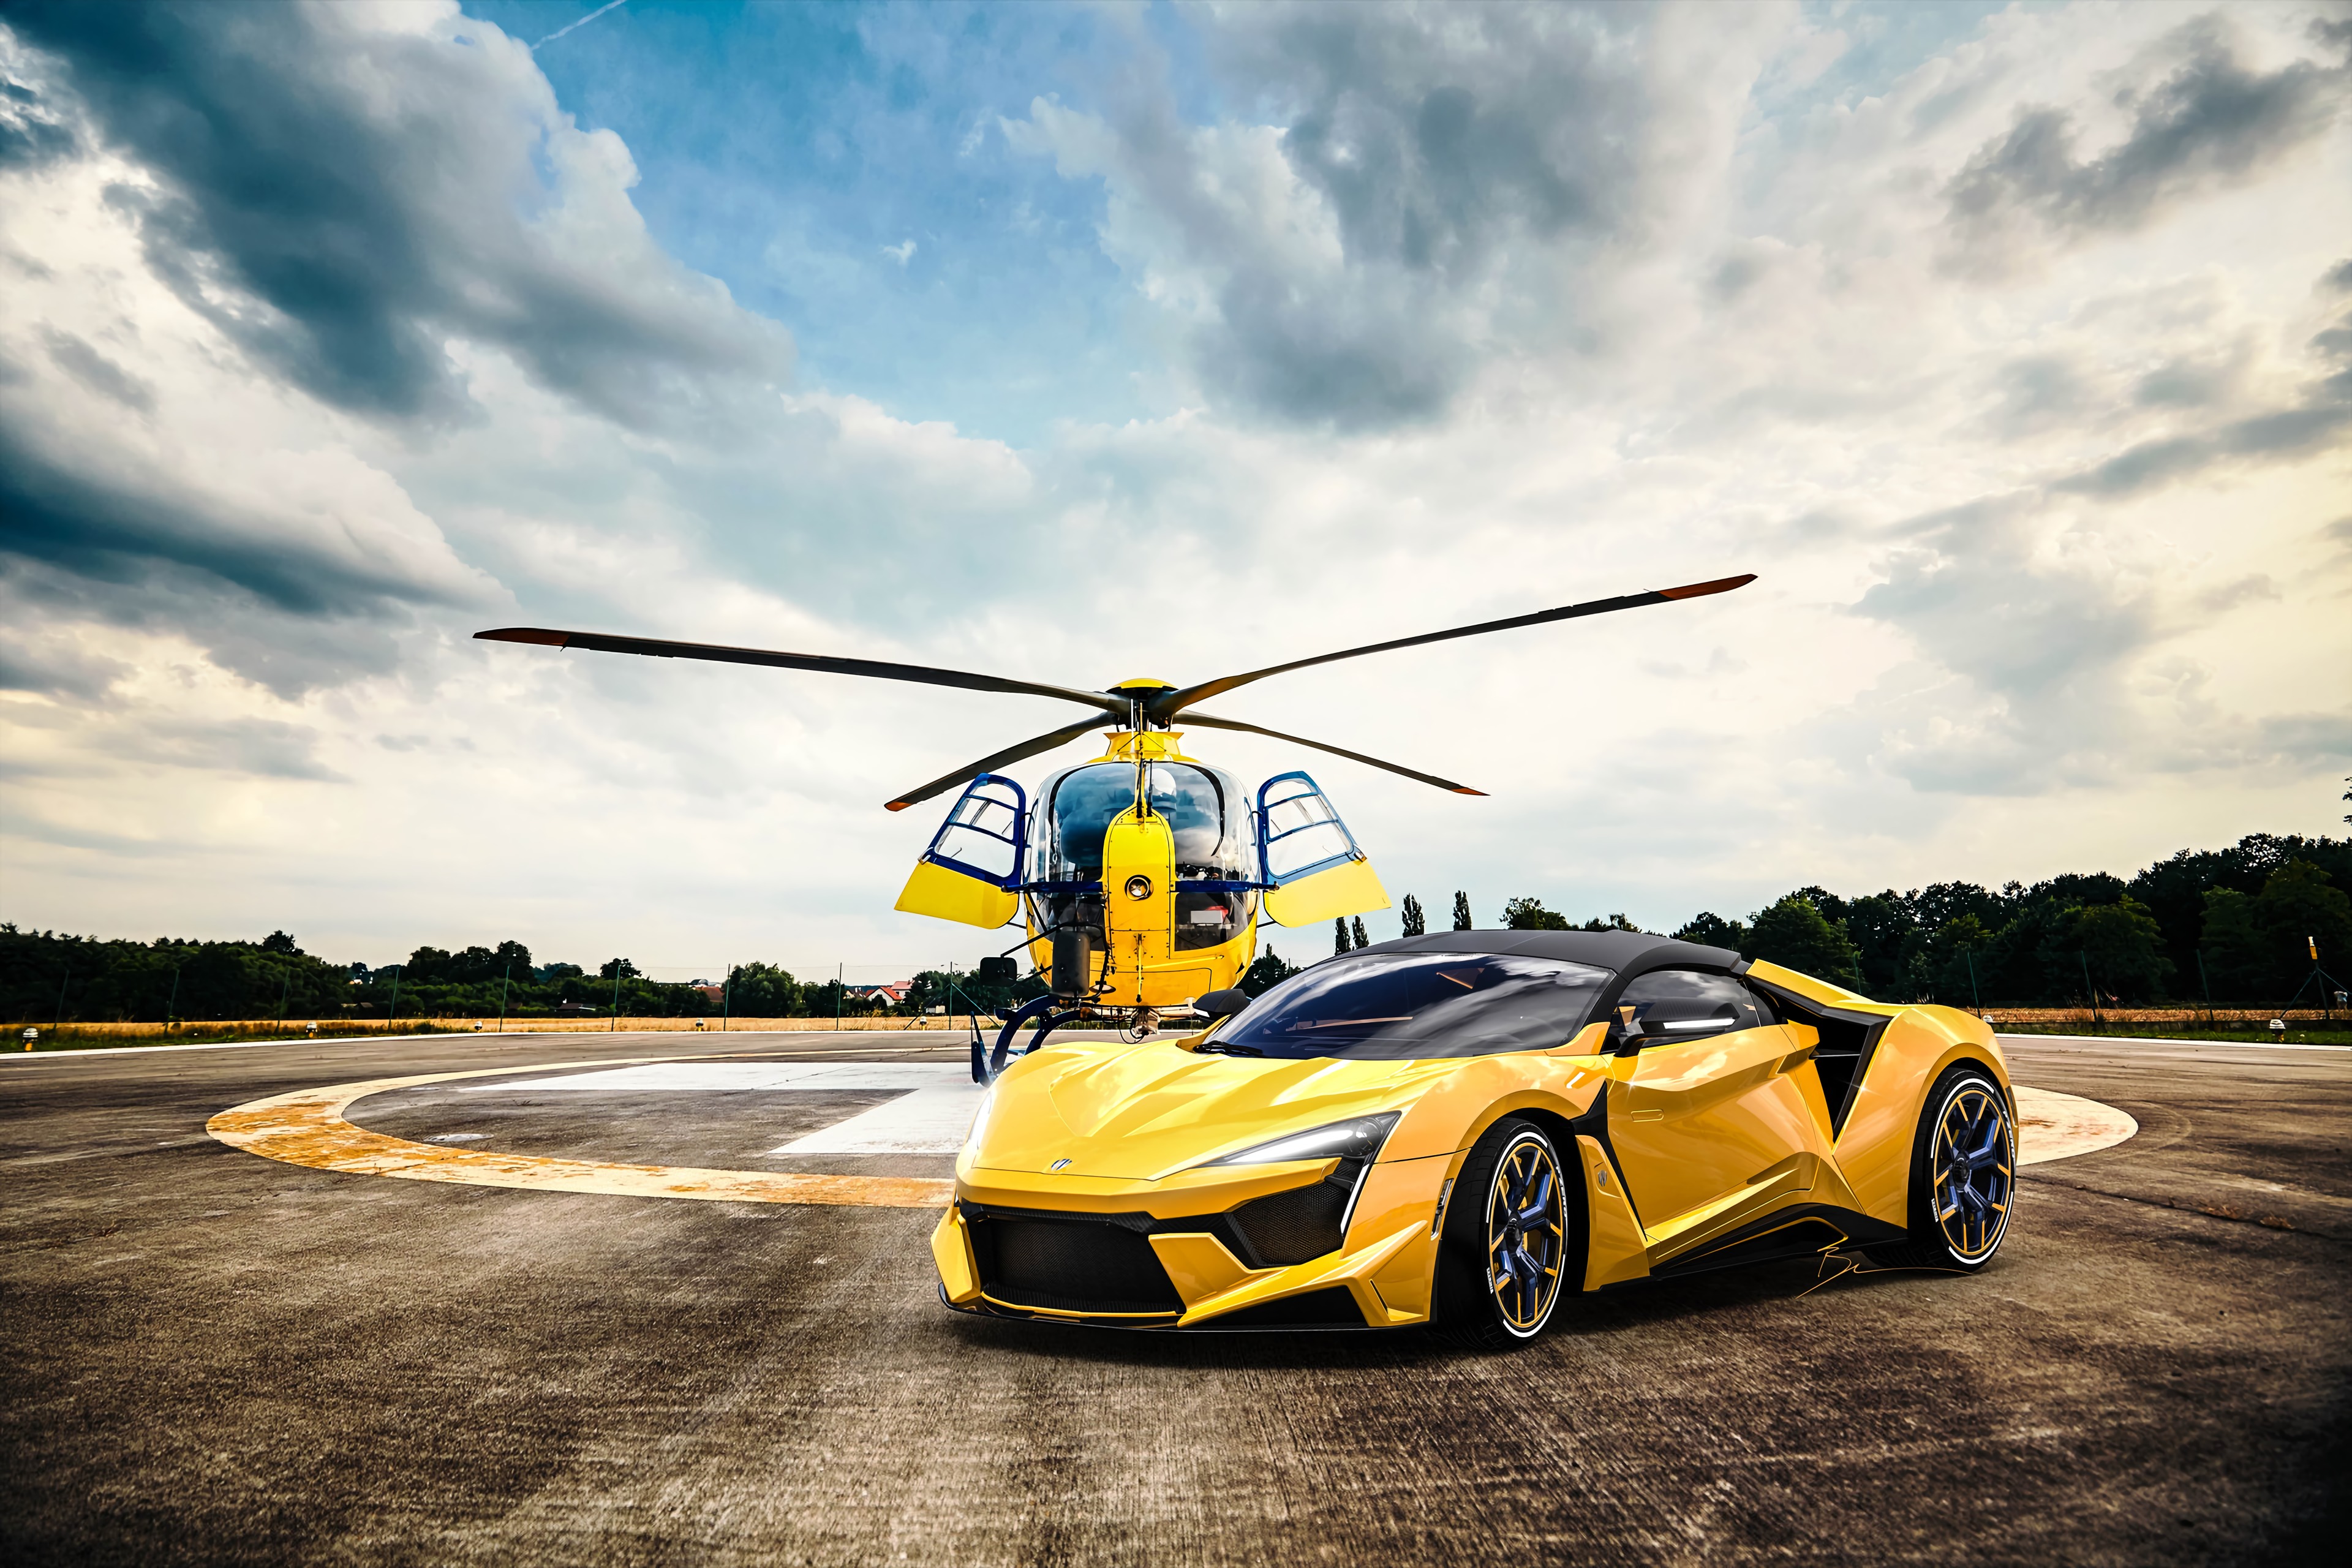 cars, sports car, helicopter, sports, yellow, car, machine Full HD